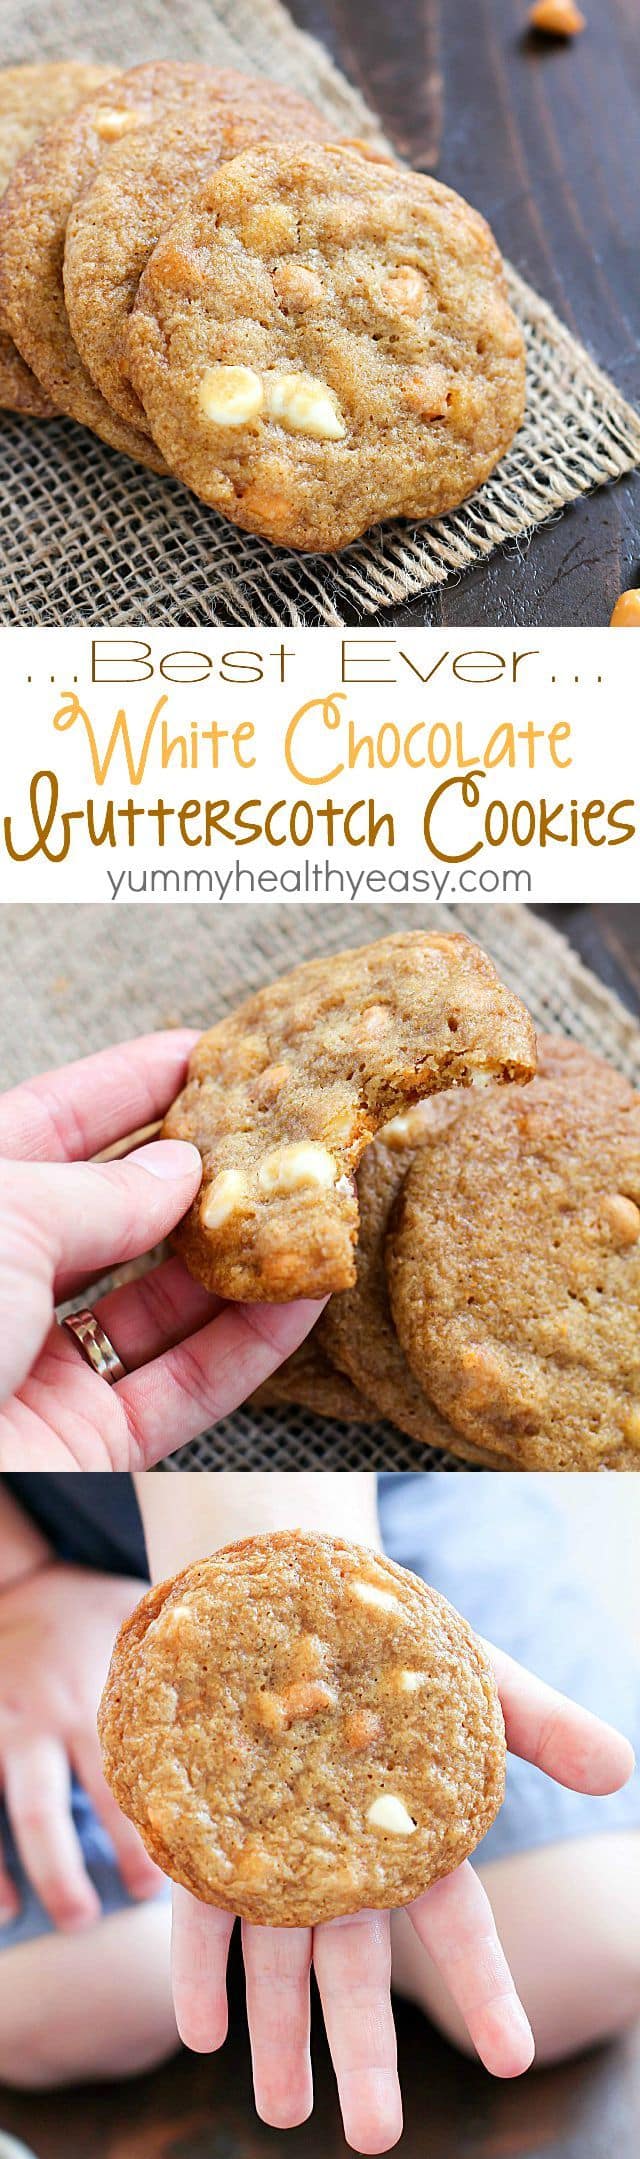 The Best Ever White Chocolate Butterscotch Cookies - these are incredible! White chocolate and butterscotch chips melted inside buttery, soft cookies. To-die-for.